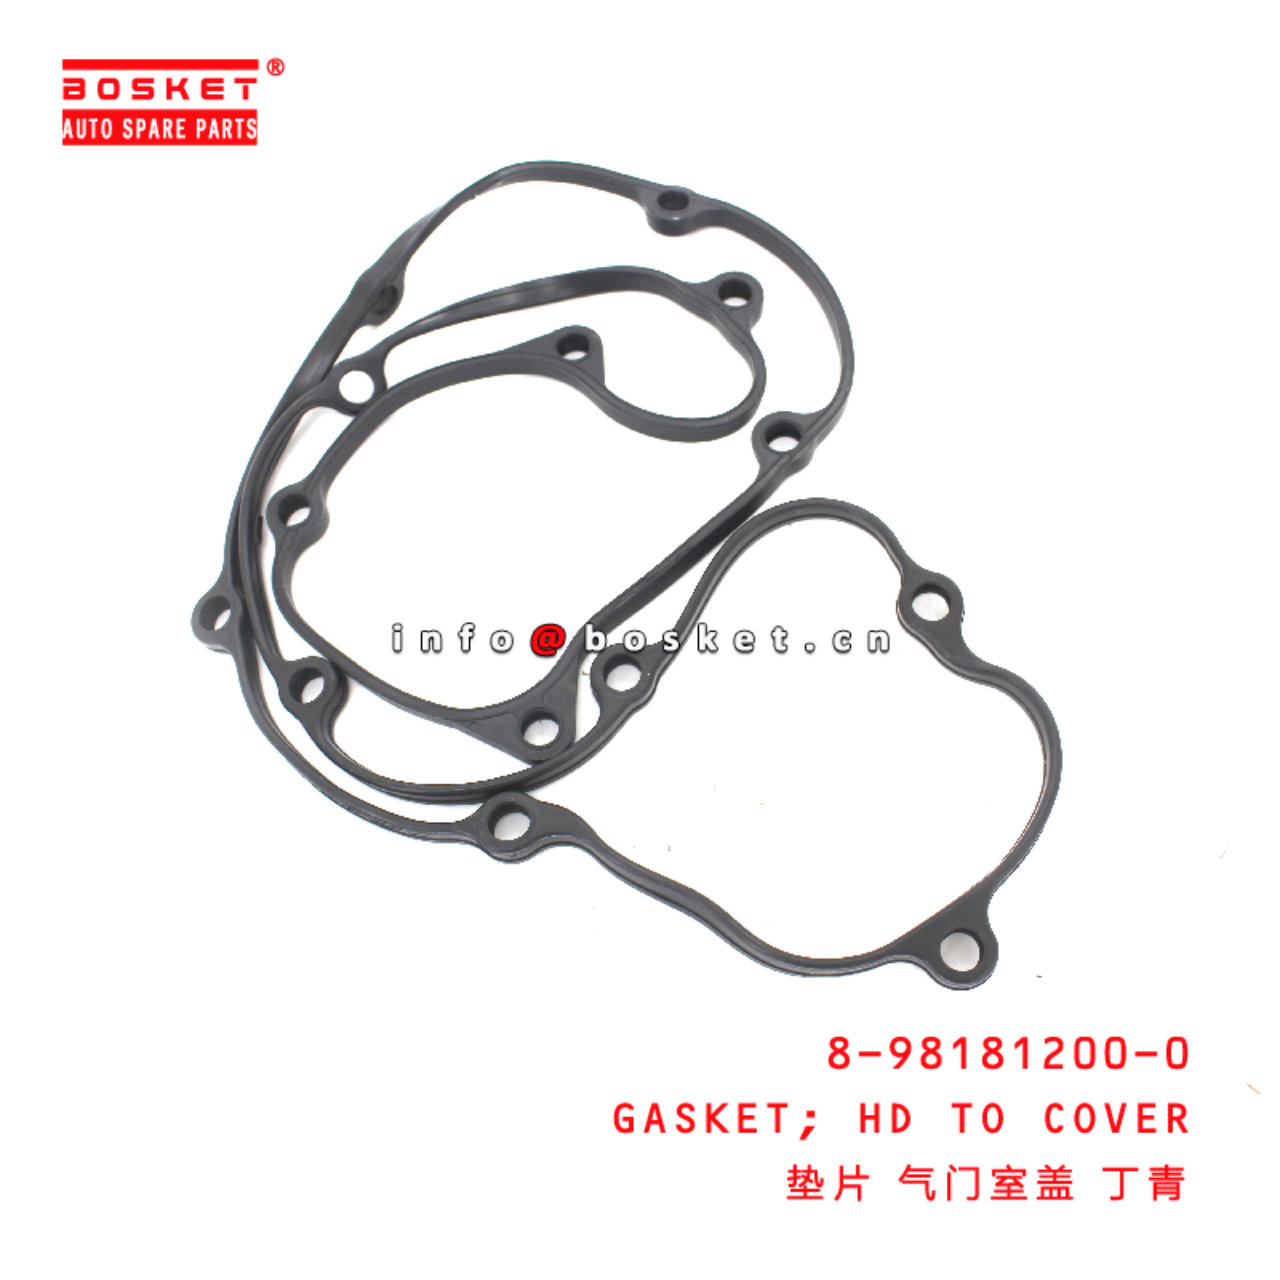 8-98181200-0 Head To Cover Gasket suitable for ISUZU NKR55 4JJ1 8981812000